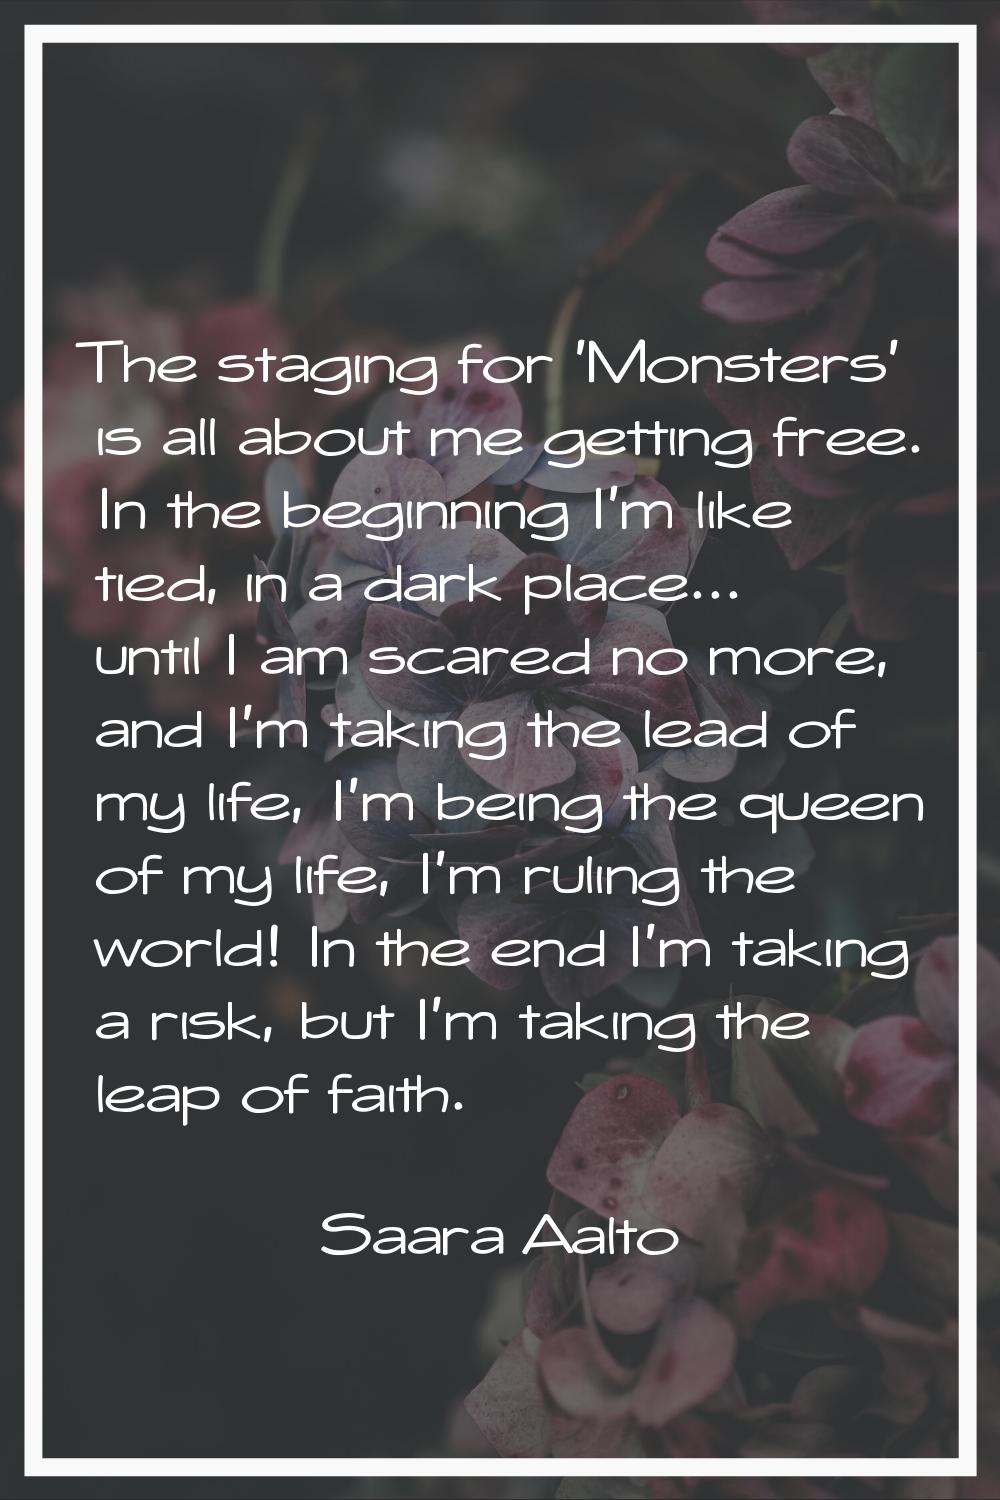 The staging for 'Monsters' is all about me getting free. In the beginning I'm like tied, in a dark 